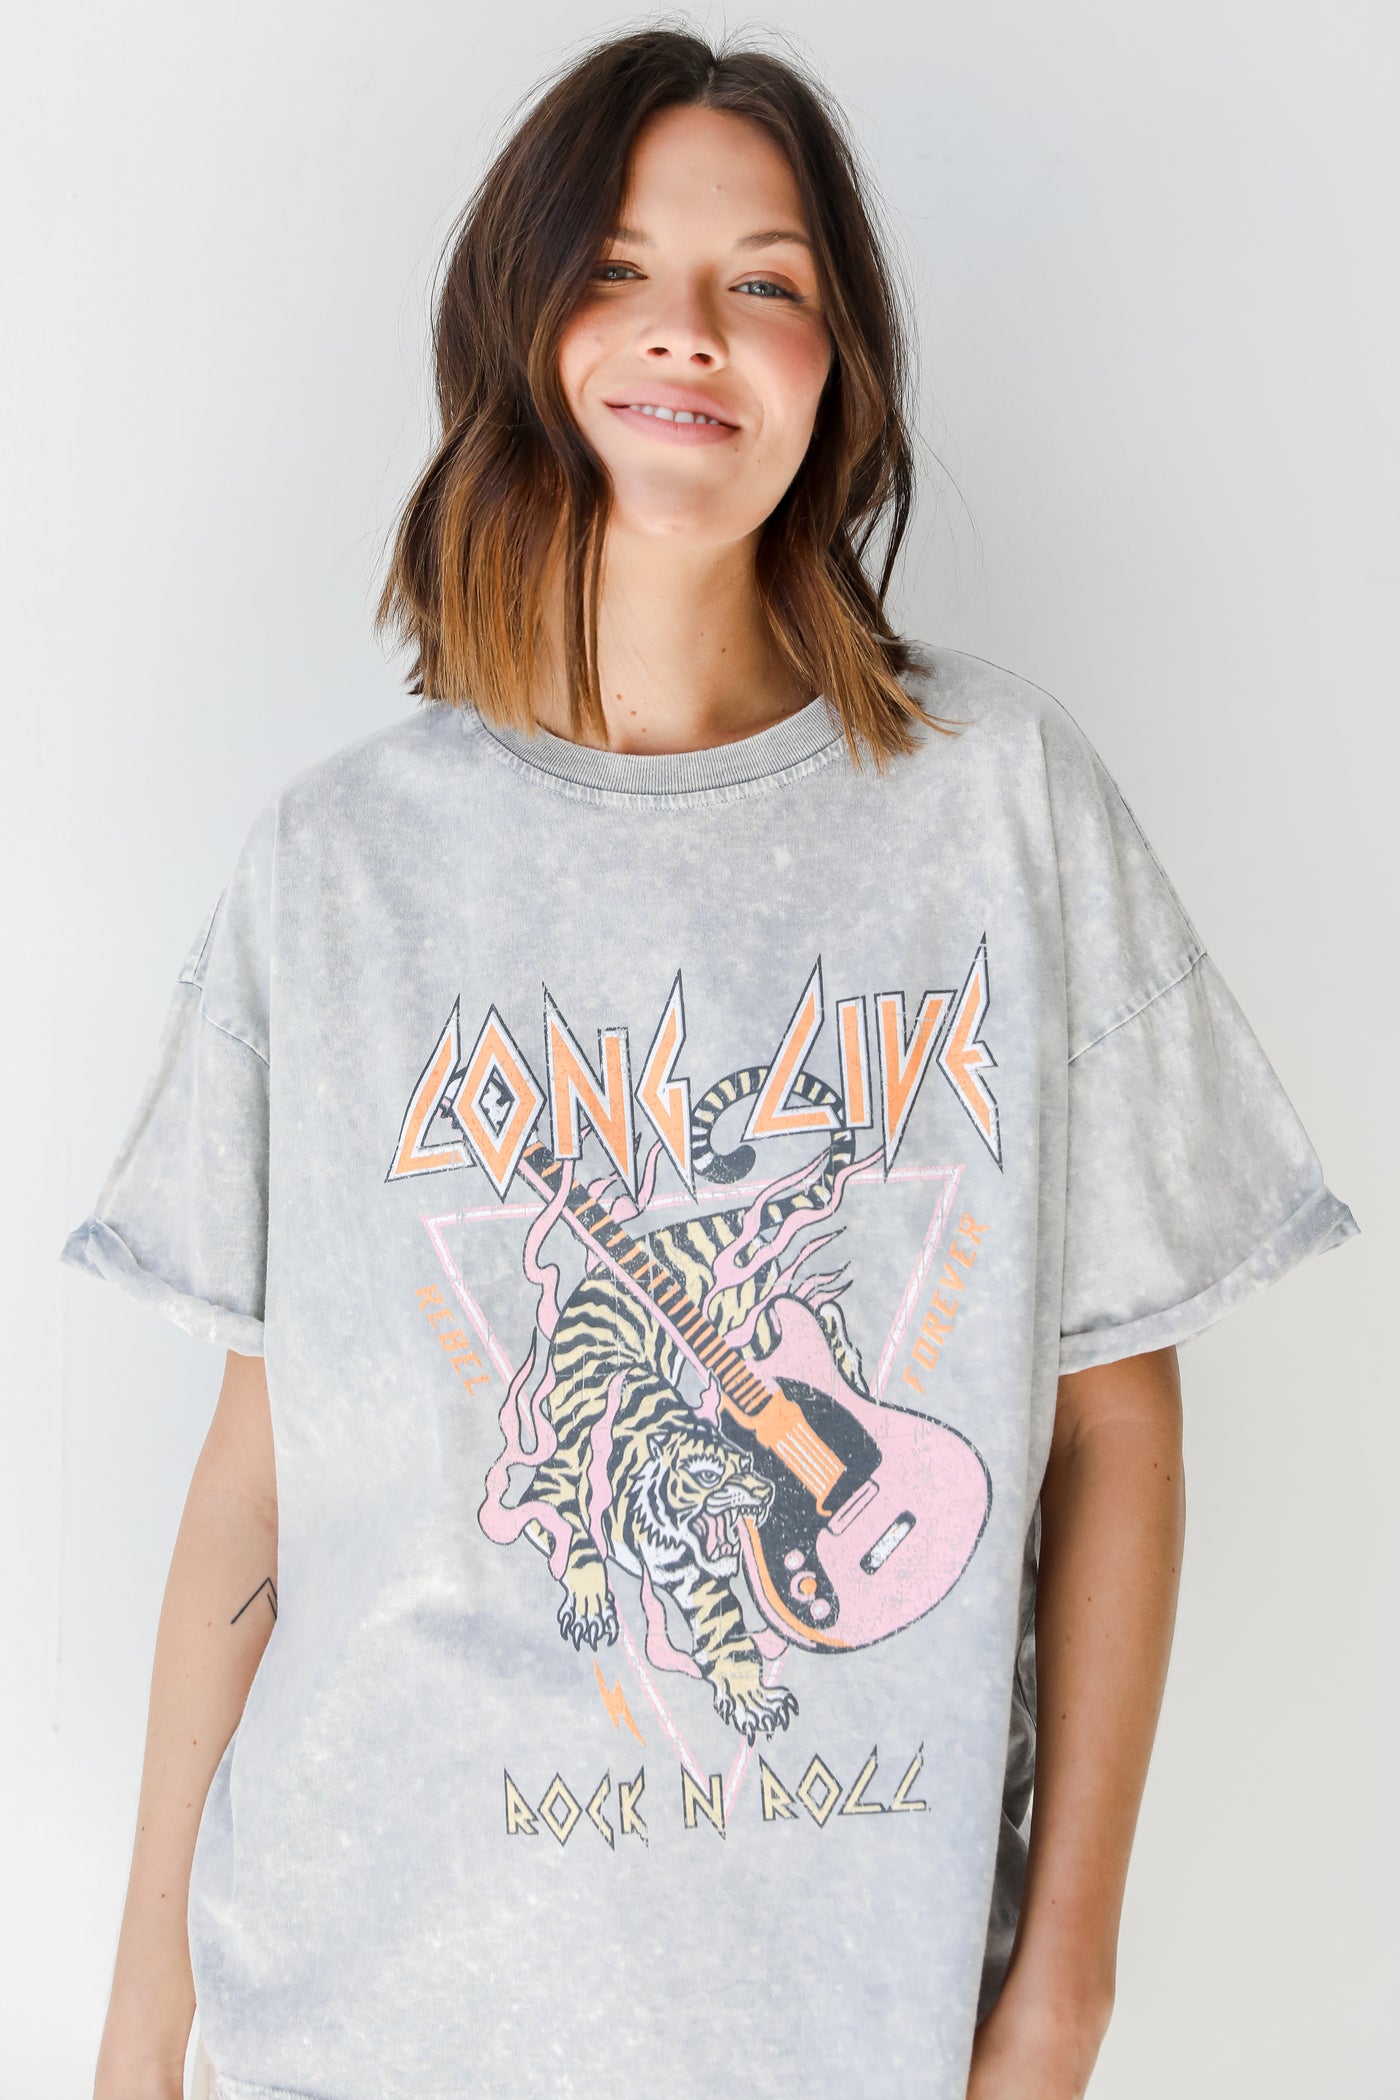 Long Live Rock N Roll Acid Washed Tee front view